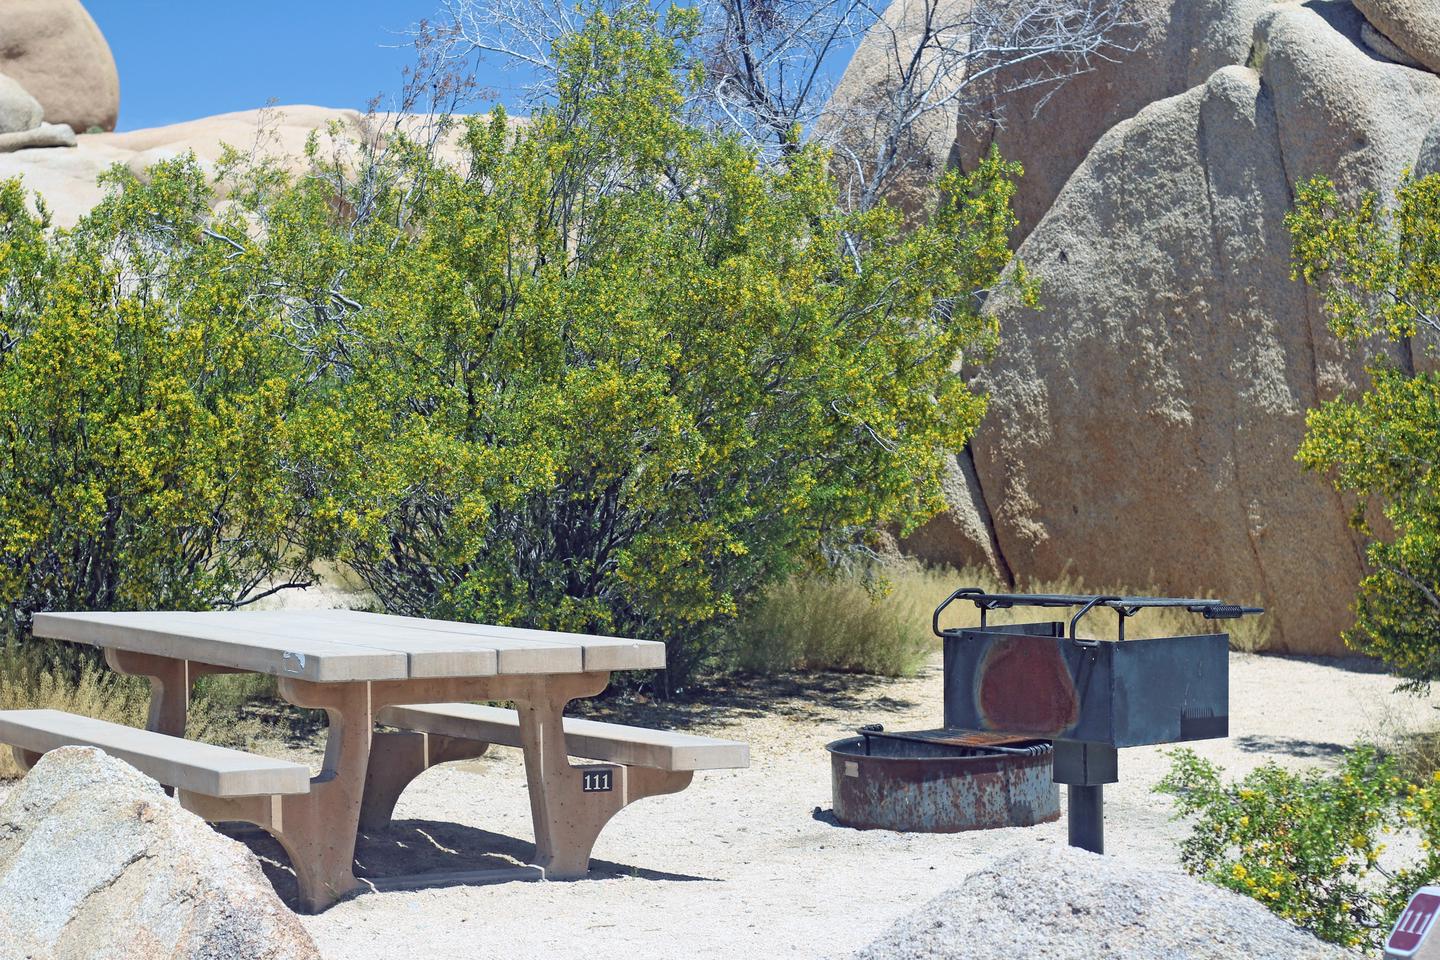 Campsite with picnic table surrounded by boulders and green plants.Campsite.